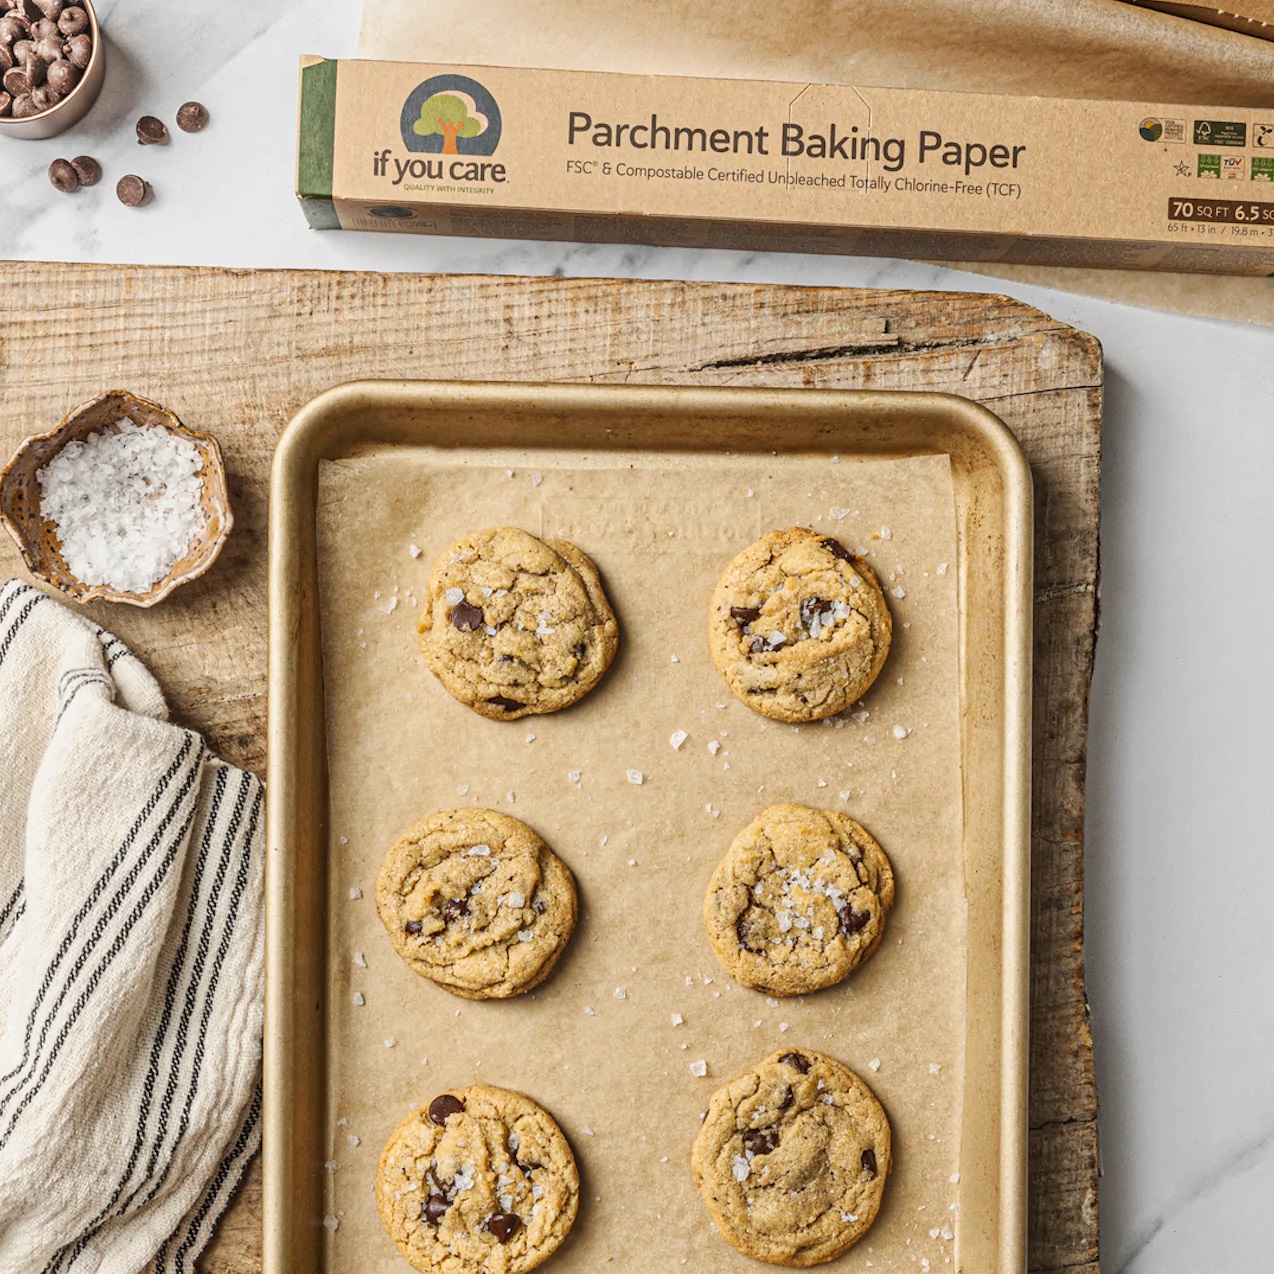 Is Parchment Paper Compostable? These 2 Great Brands Are